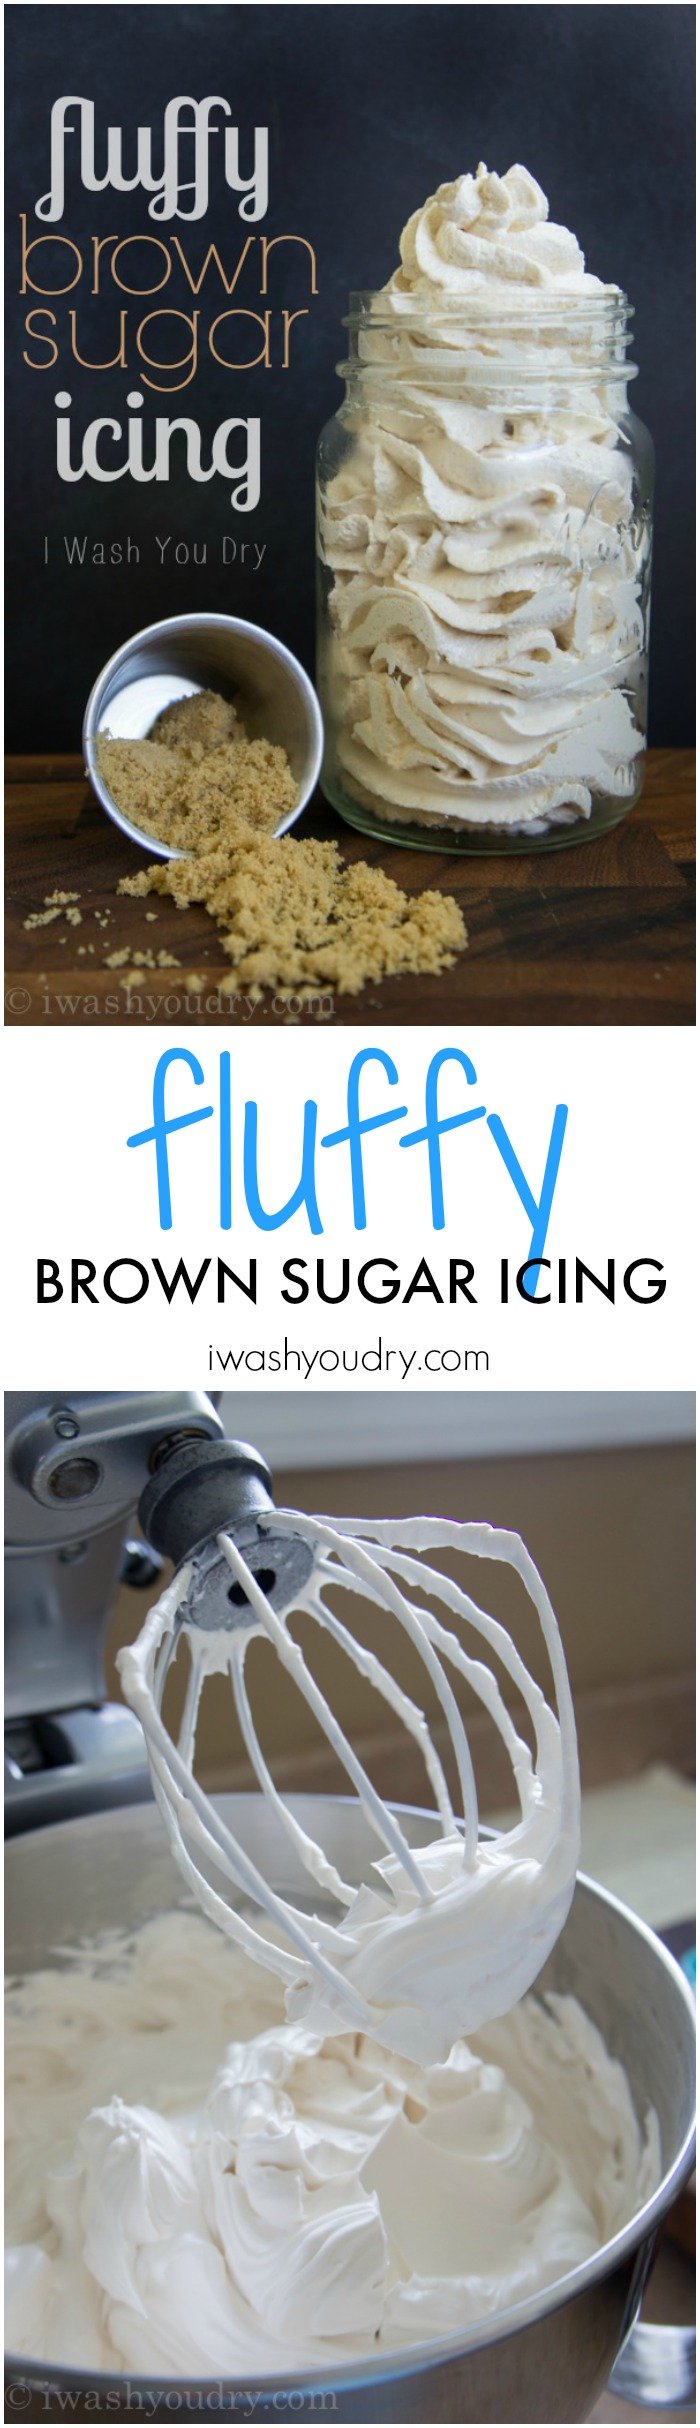 This amazing Fluffy Brown Sugar Icing is a vintage recipe! It's light and fluffy and tastes like a caramel marshmallow!